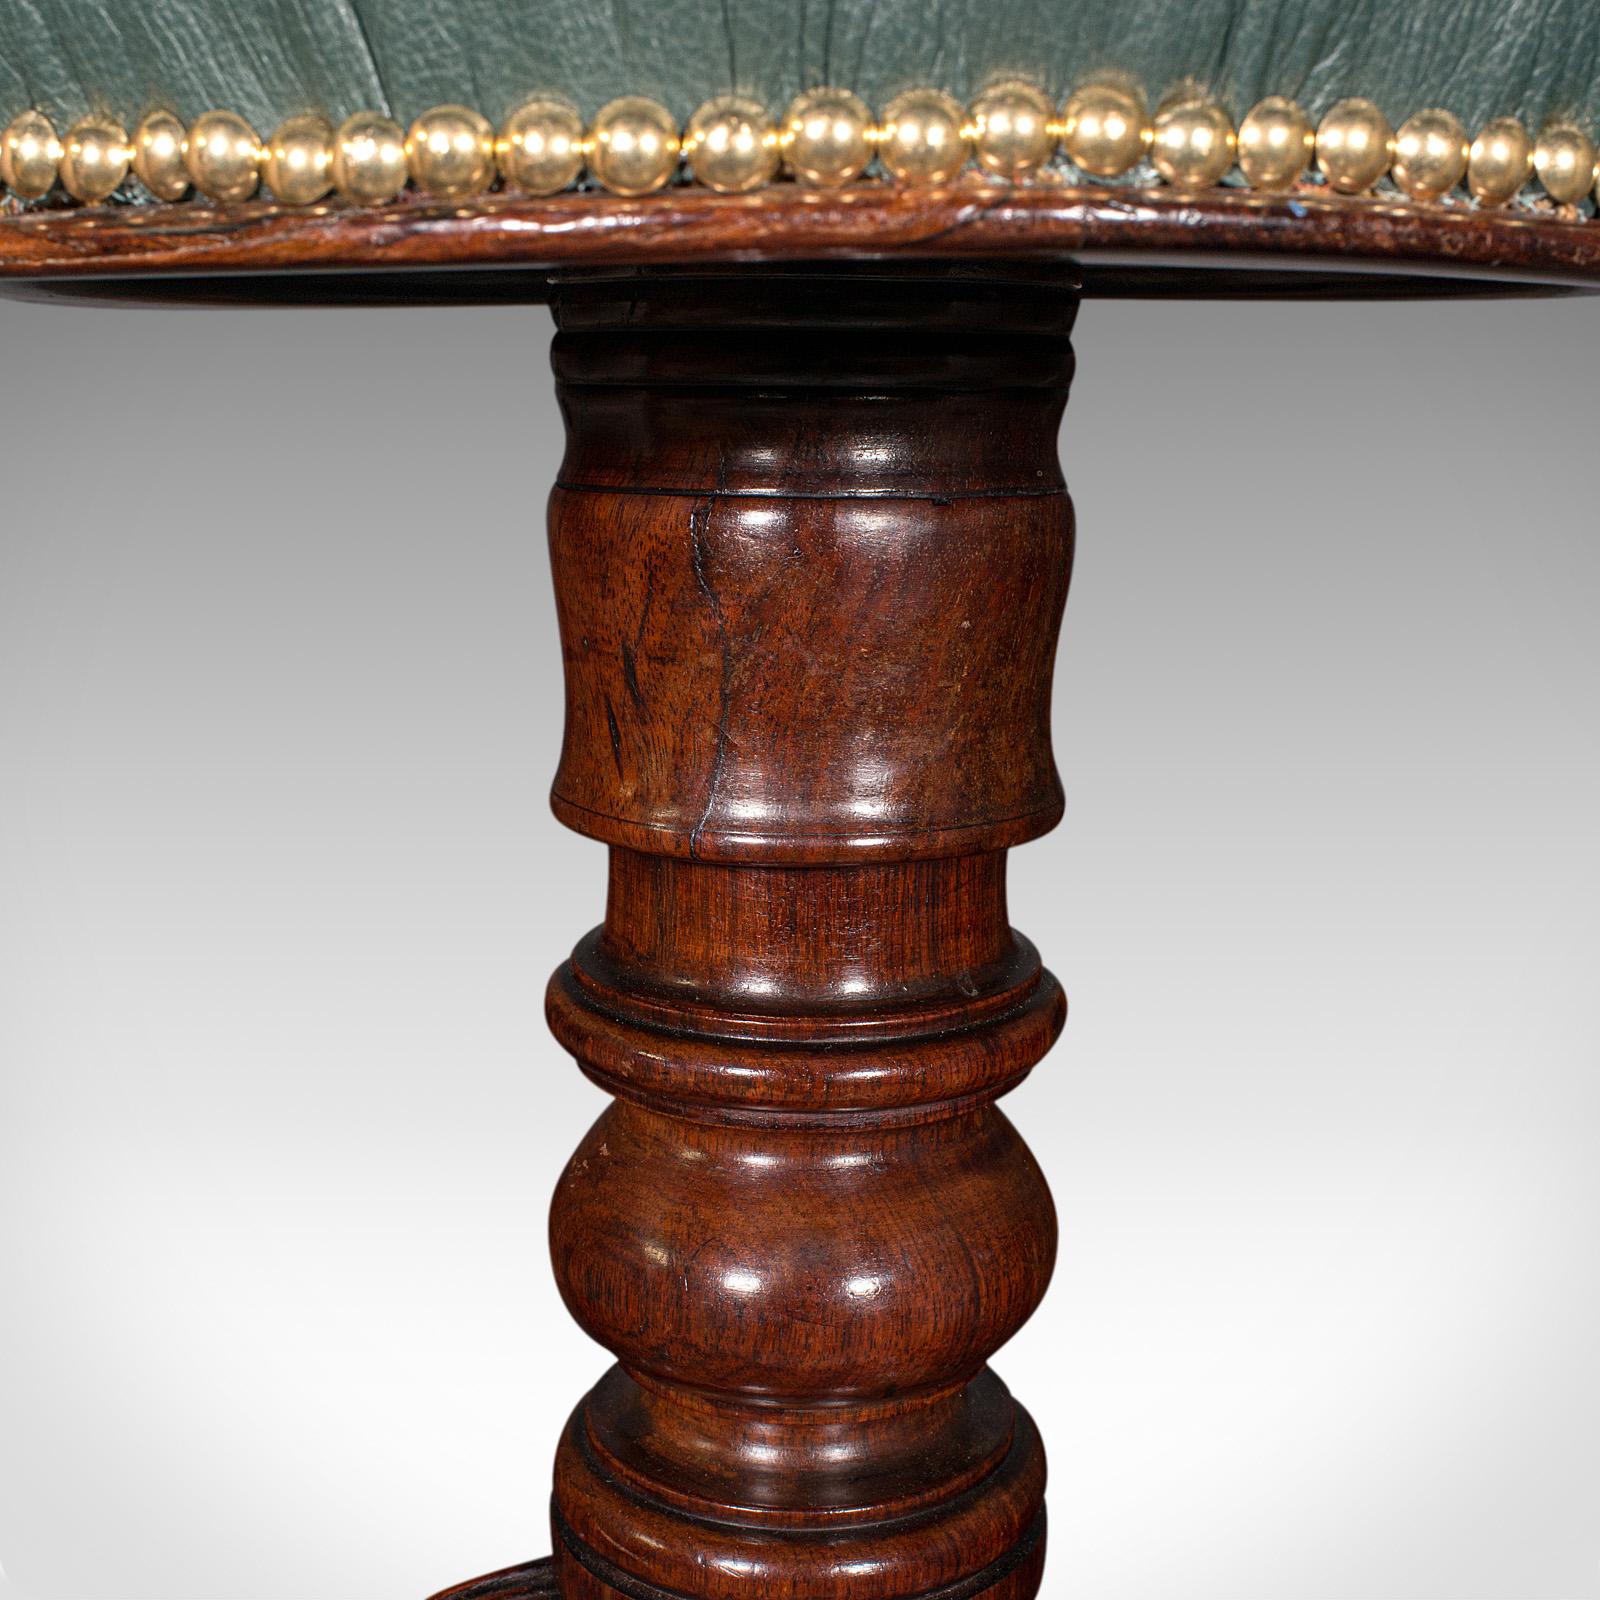 Antique Piano Stool, English, Leather, Riser, Recital, Dressing, Victorian, 1850 For Sale 1